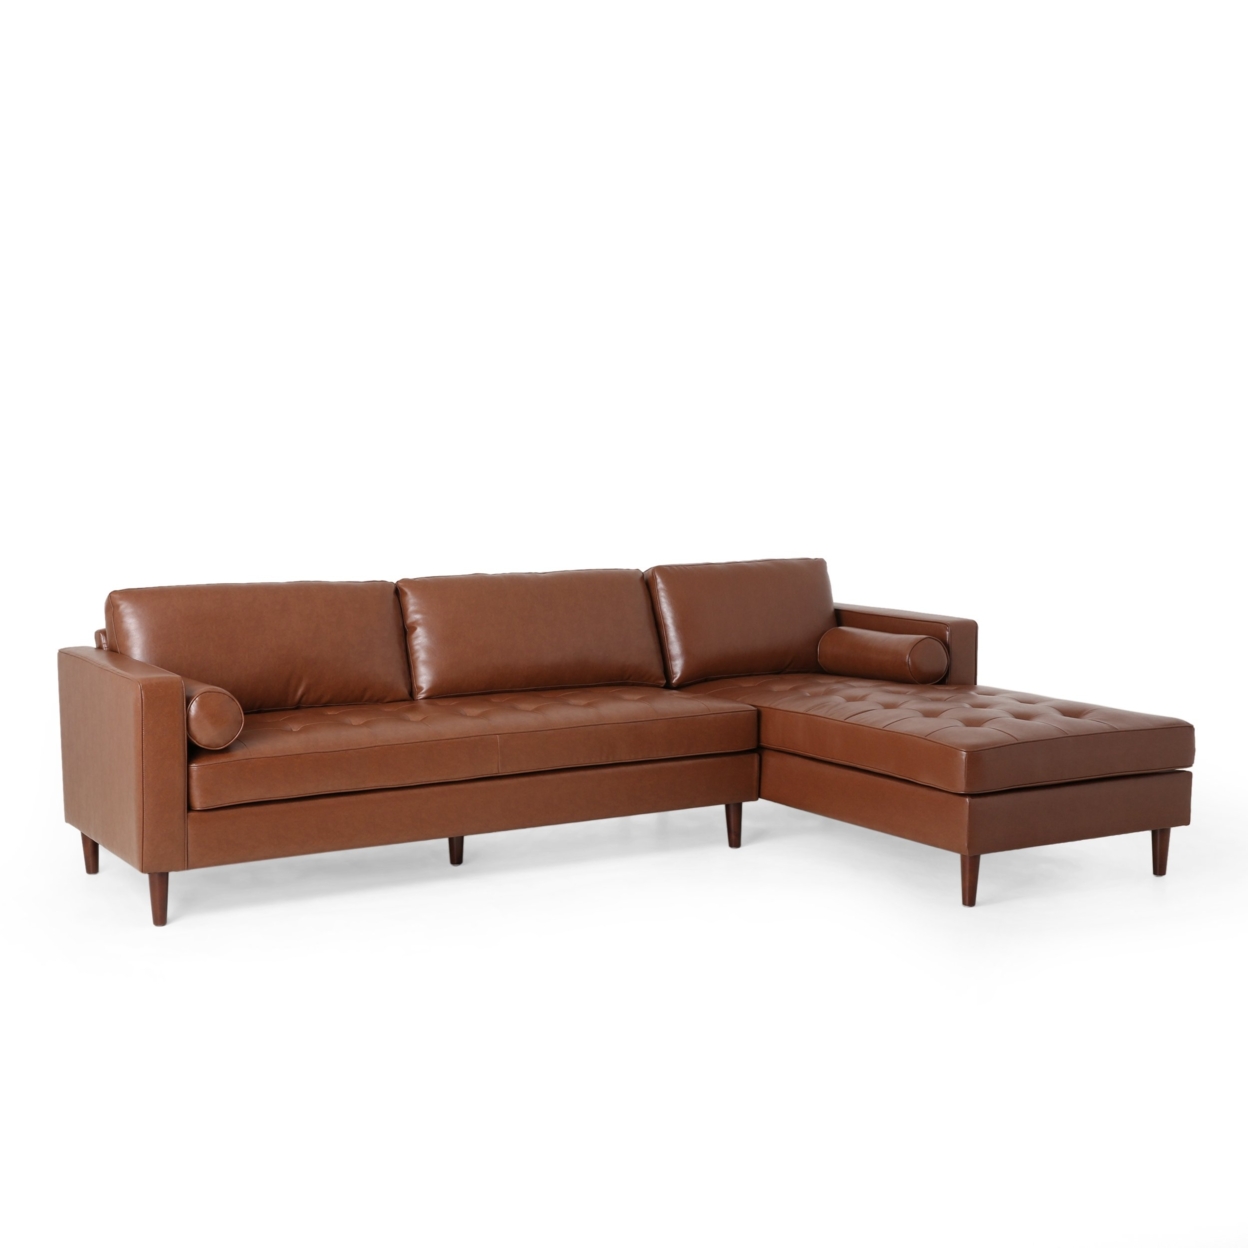 Lockbourne Contemporary Tufted Upholstered Chaise Sectional - Espresso/cognac